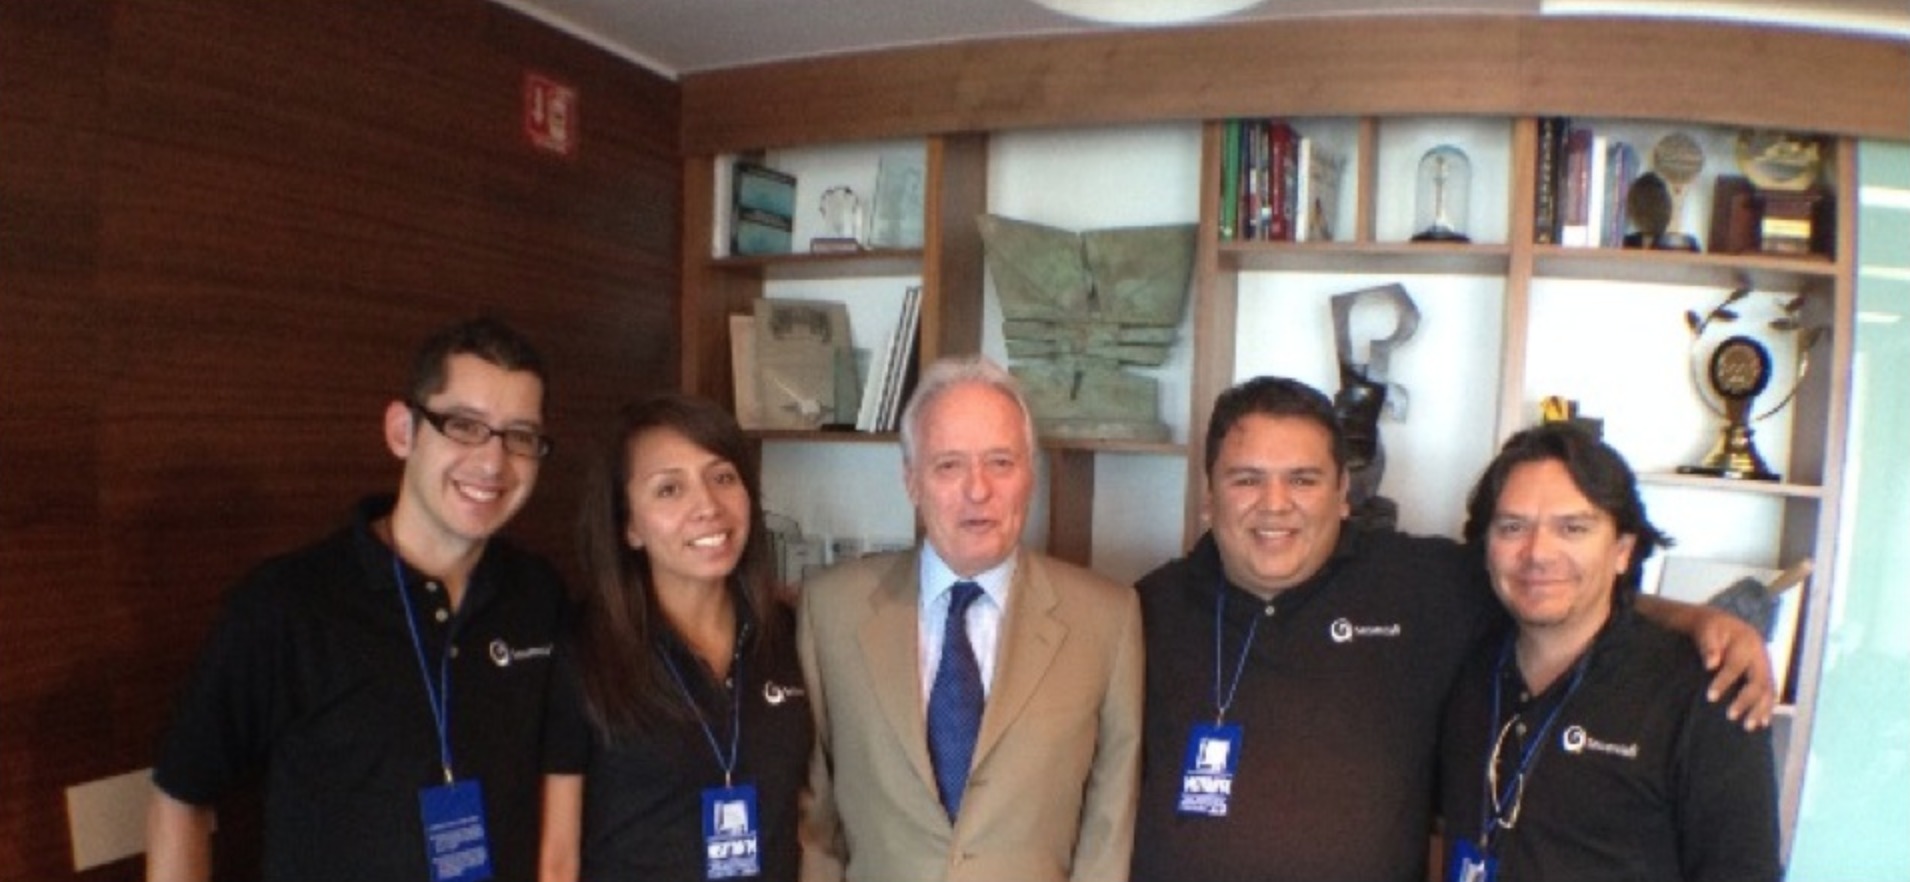 SecuenciaFi Production Agency (from left to right in black: Angel, Isis, Jairo and Hector) with Alejandro Martí, wealthy sporting goods chain owner (Martí) and social activist, after filming Martí for their Juárez documentary.